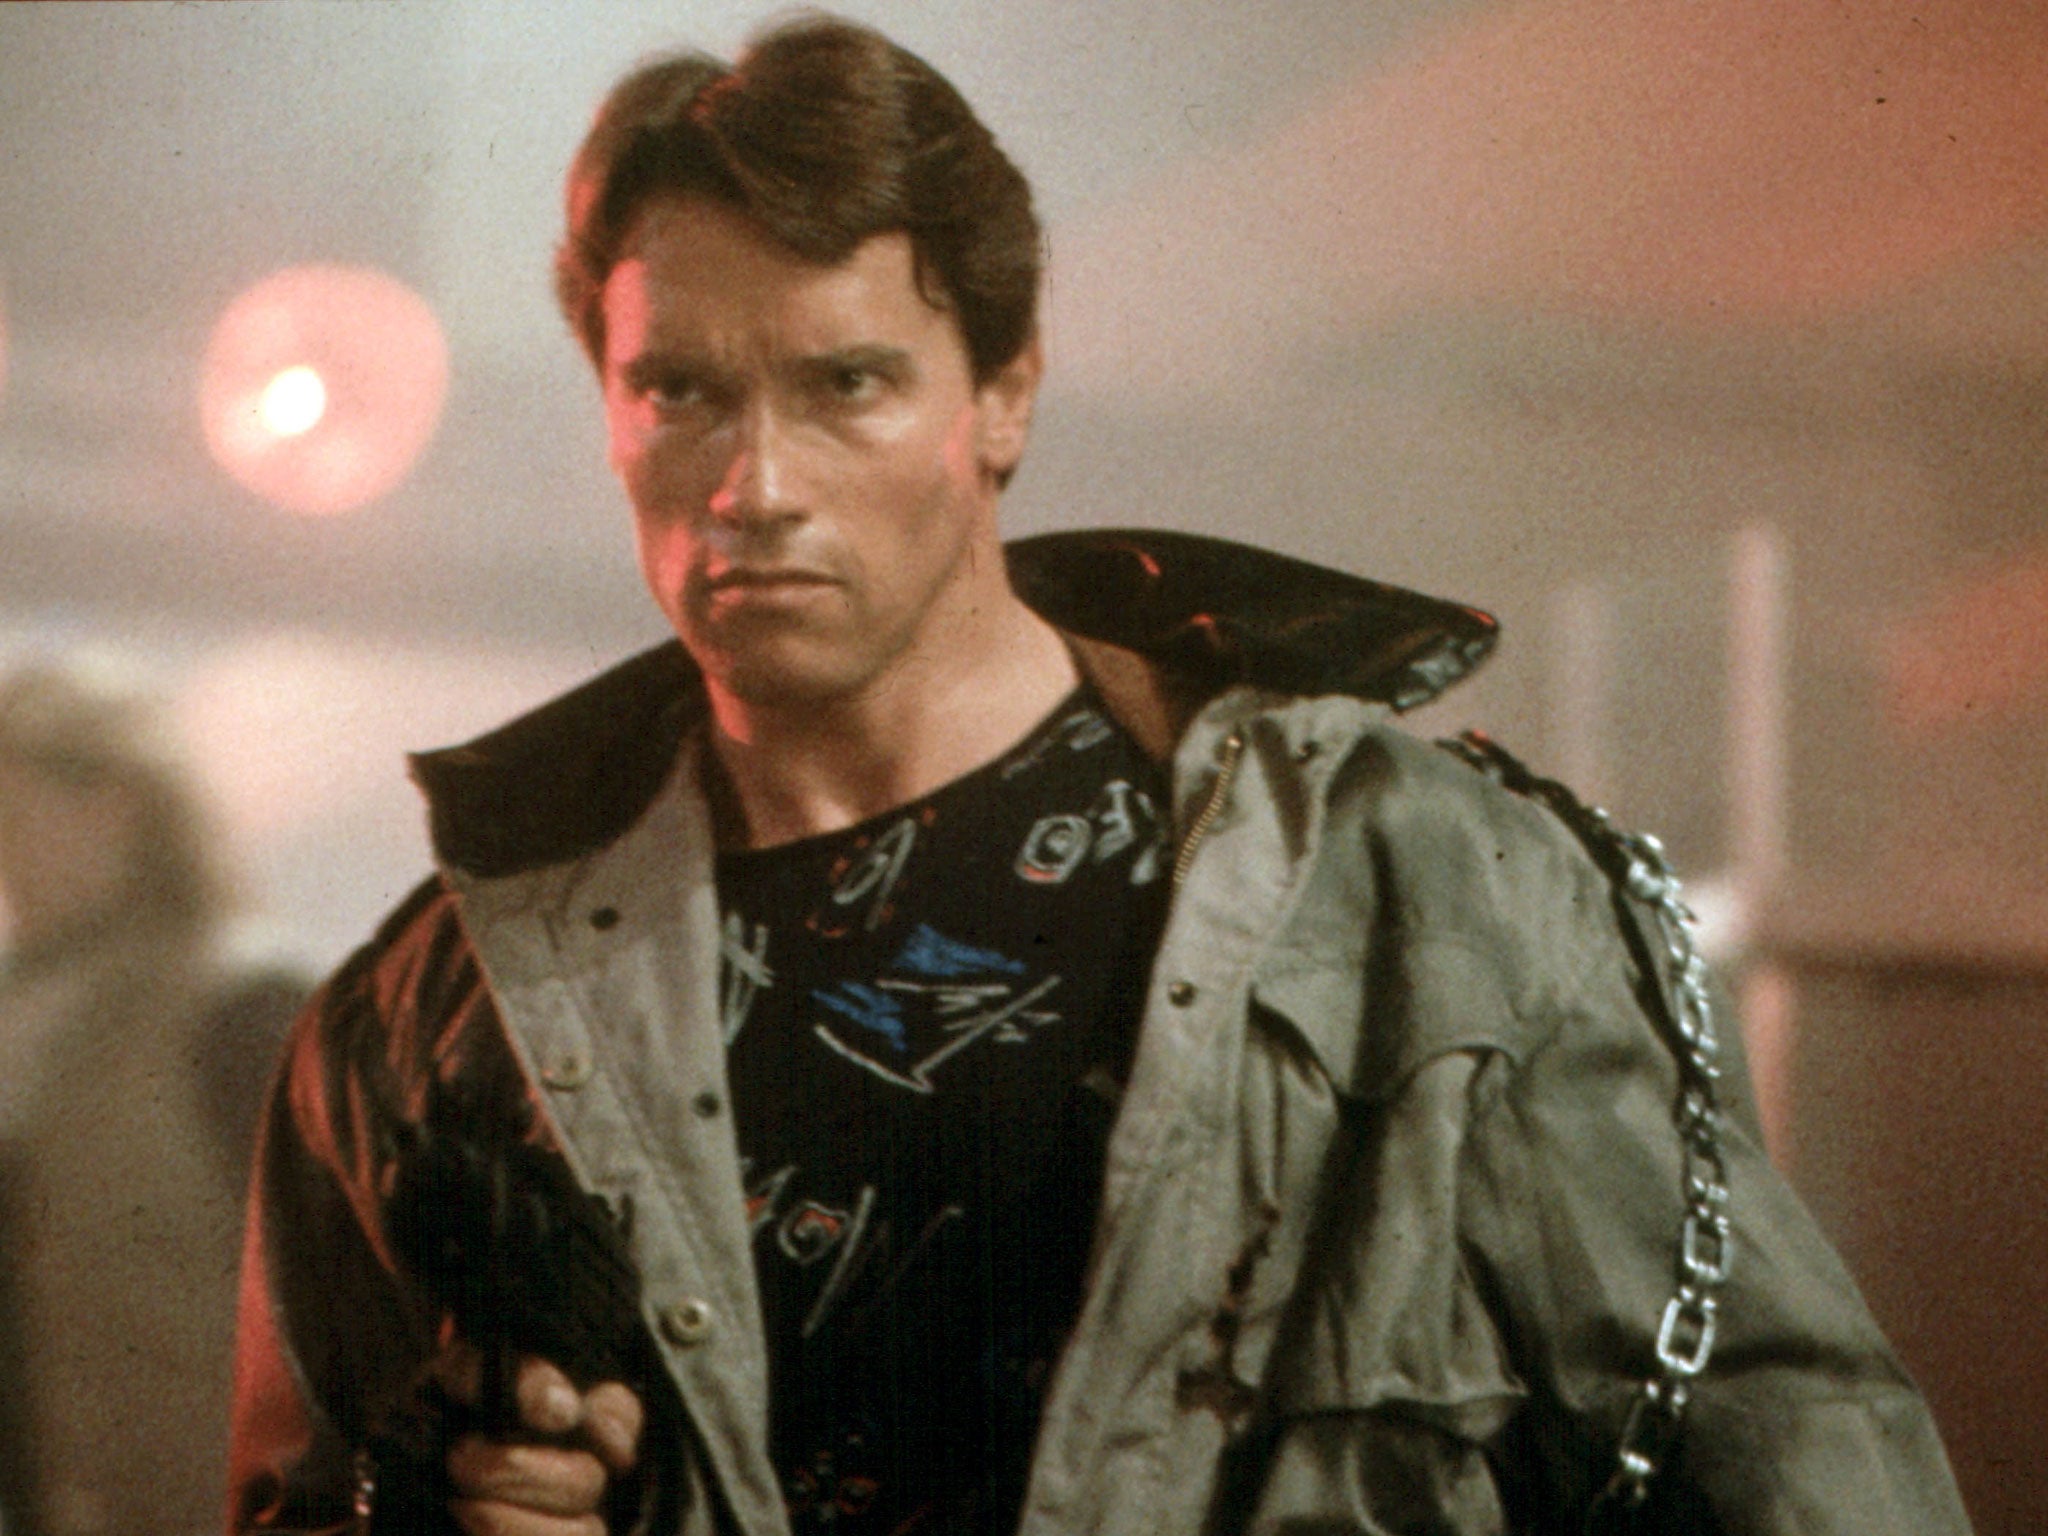 When Arnold Schwarzenegger said 'I'll be back' in The Terminator, he meant it